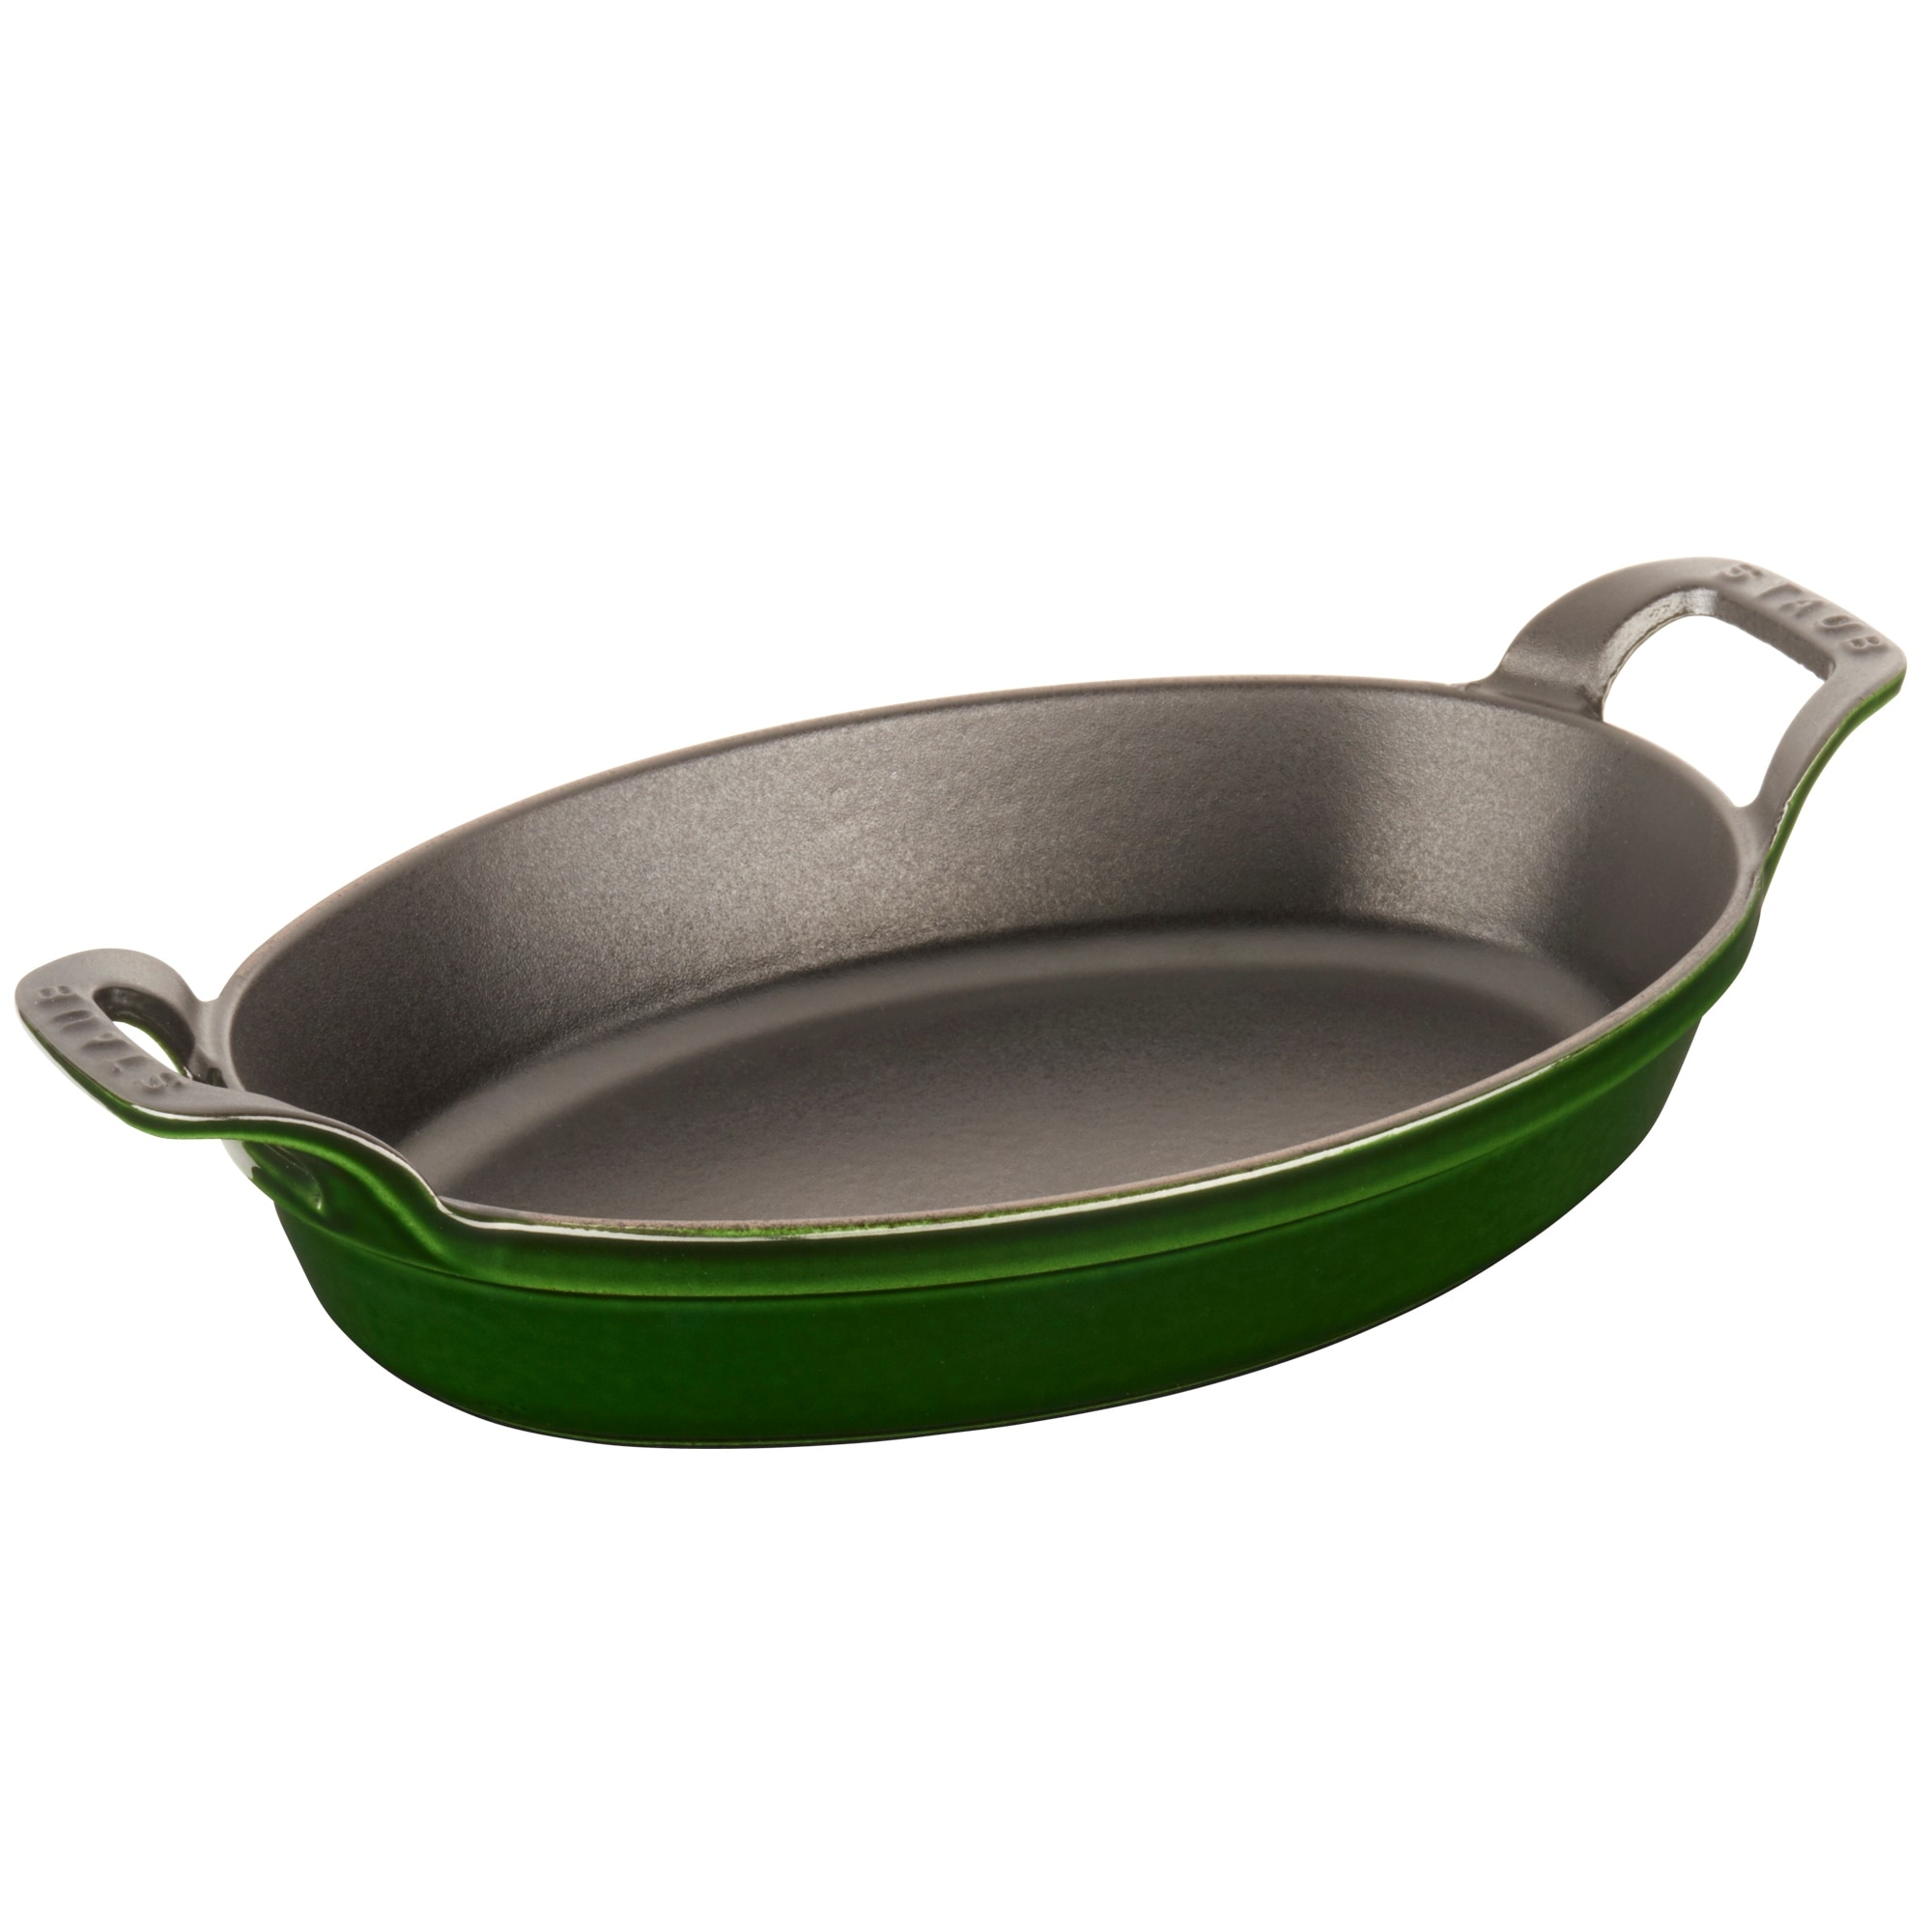 https://ak1.ostkcdn.com/images/products/is/images/direct/71f0bb082a9b0cdef26868a03cc442941089bd3d/Staub-Cast-Iron-Oval-Baking-Dish.jpg